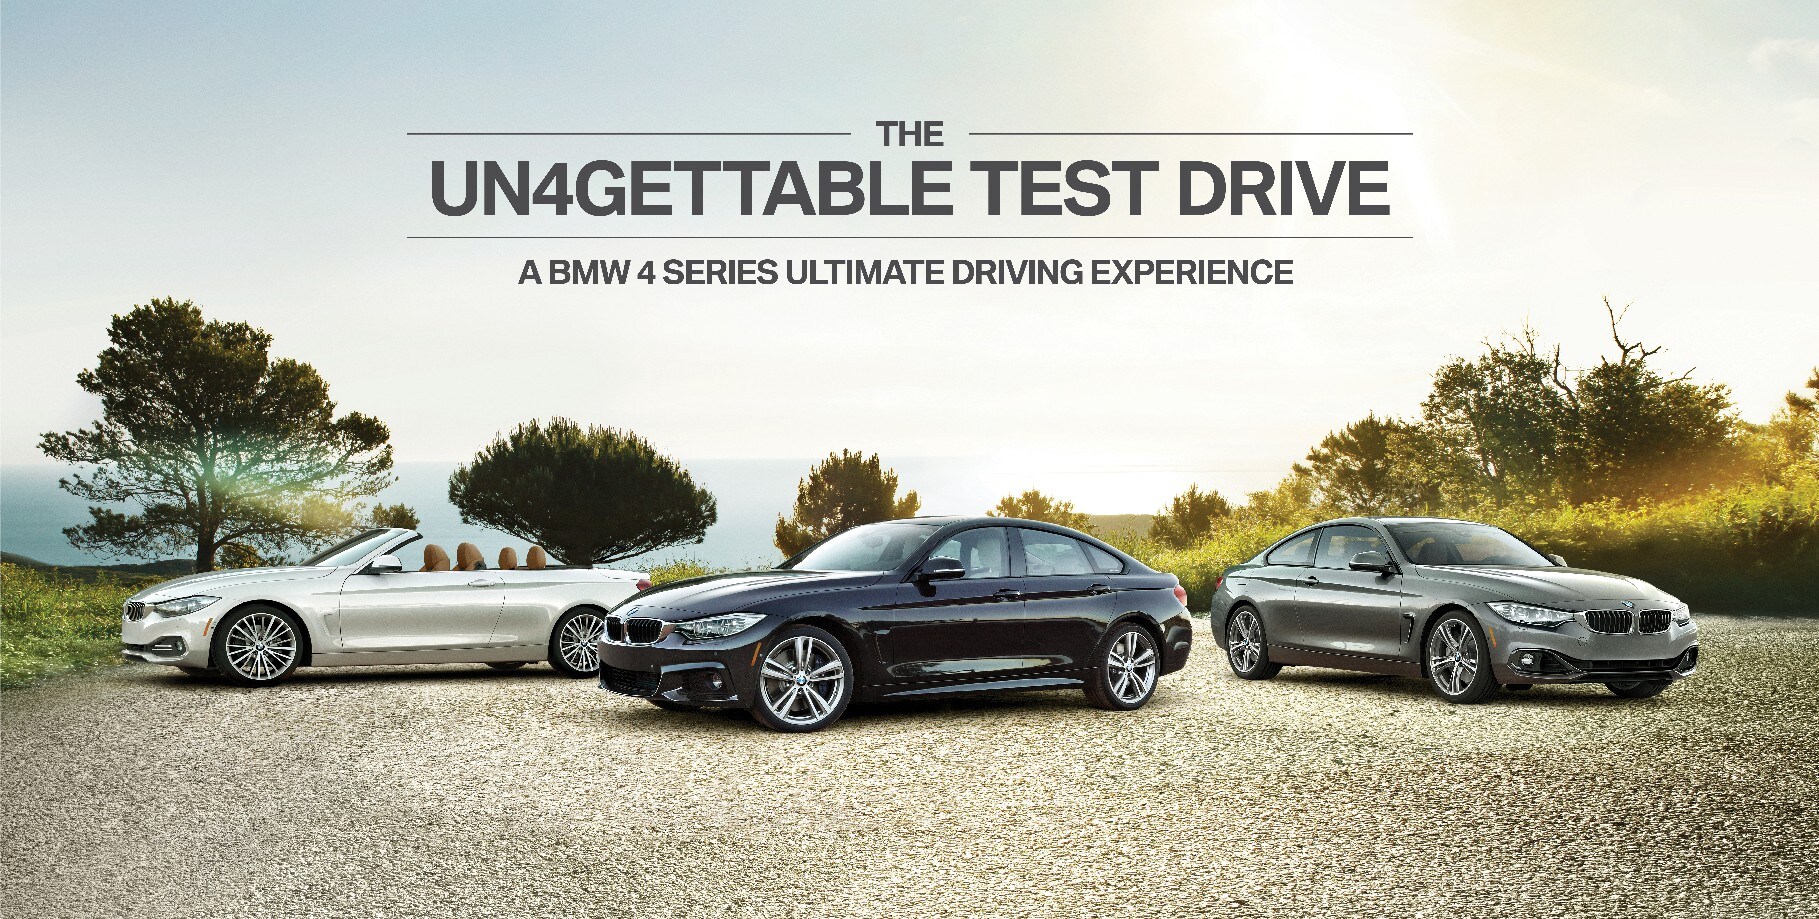 Bmw ultimate driving experience cost #7